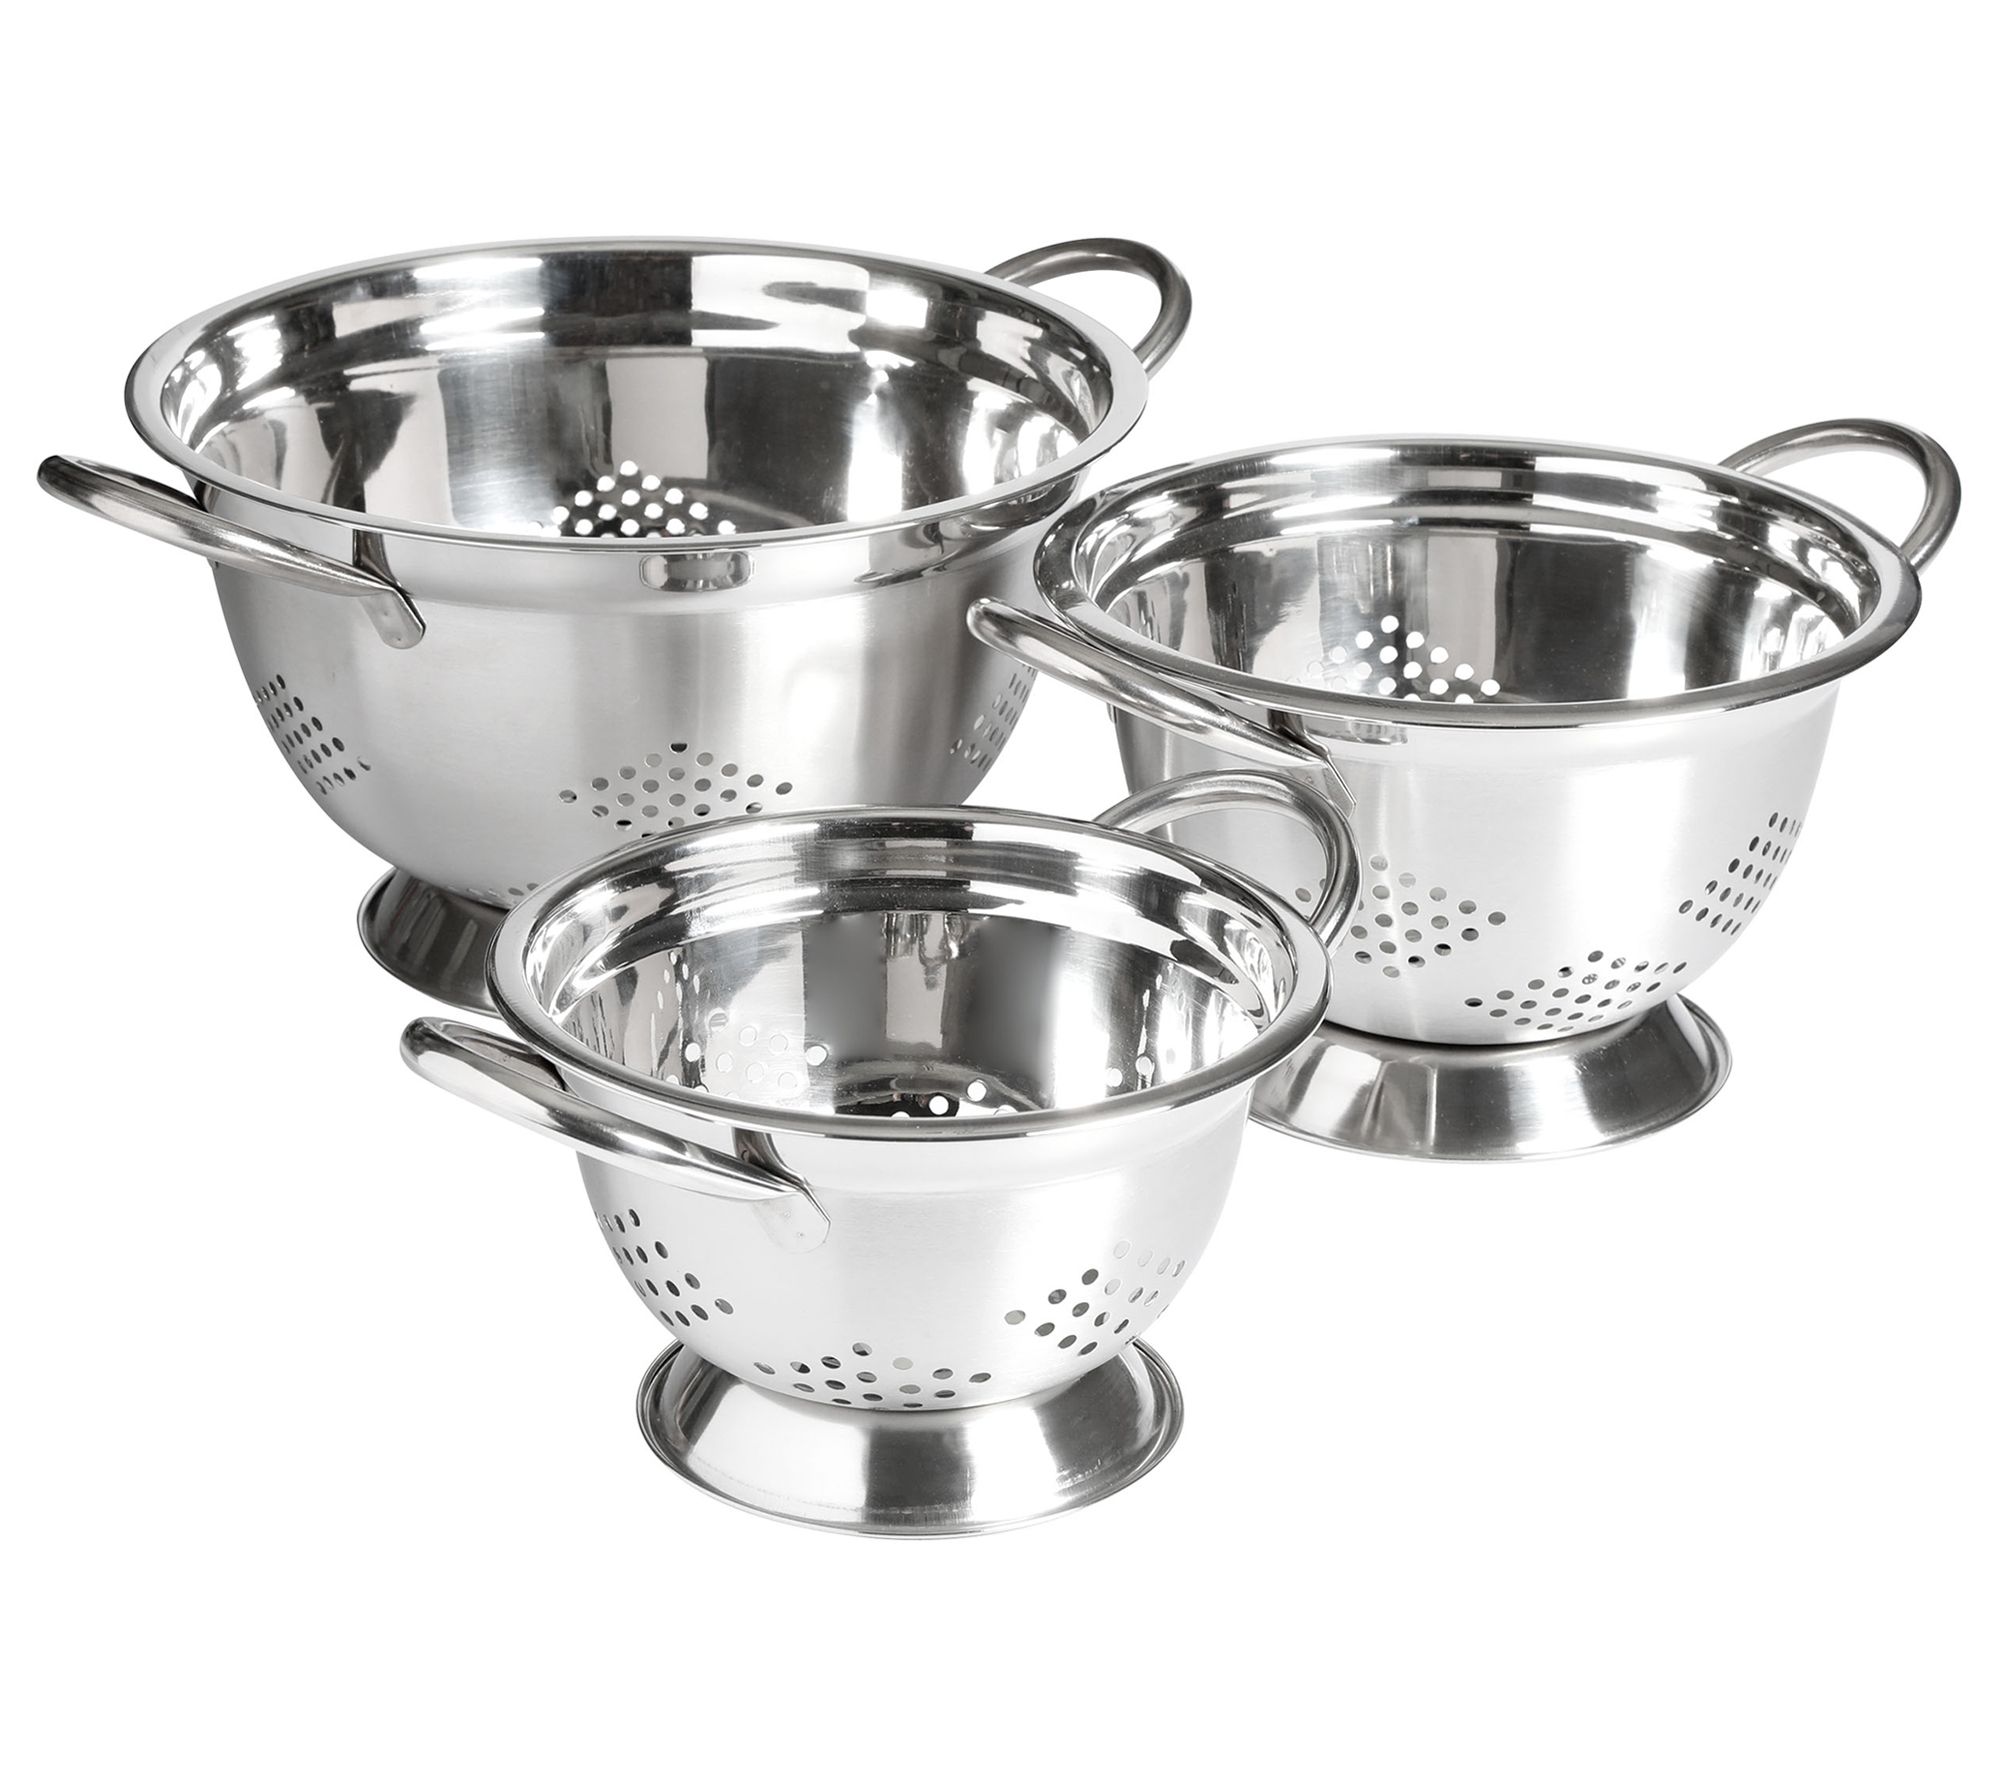 KITCHENAID Expandable STAINLESS STEEL COLANDER/STRAINER - NEW